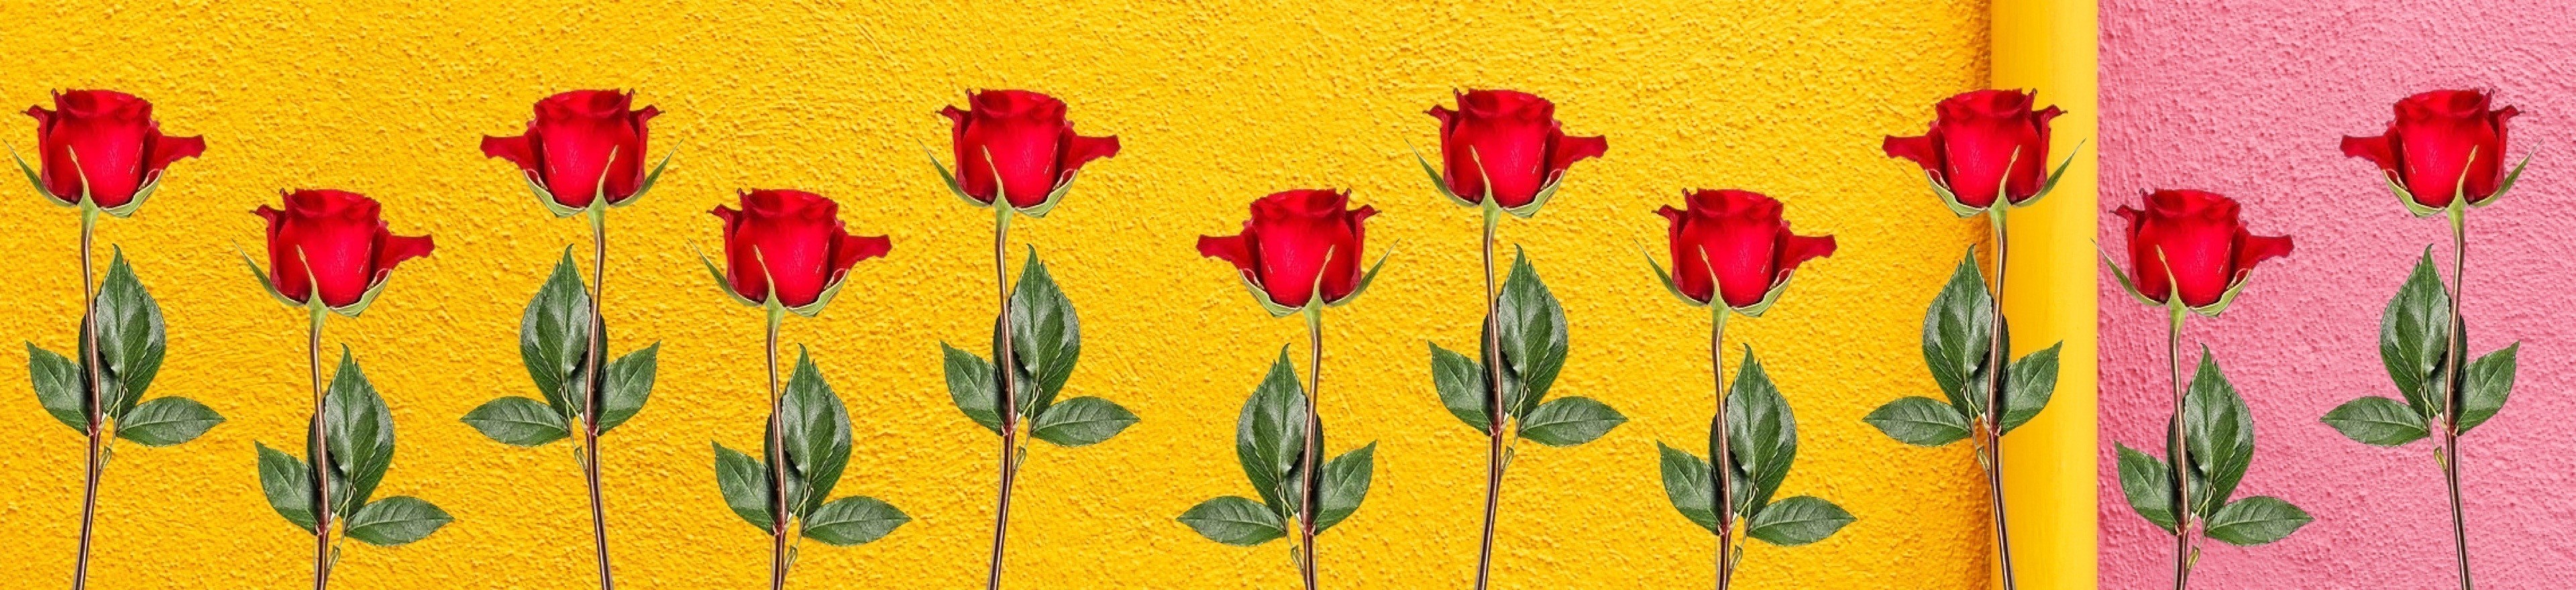 Red roses against a yellow and pink wall.